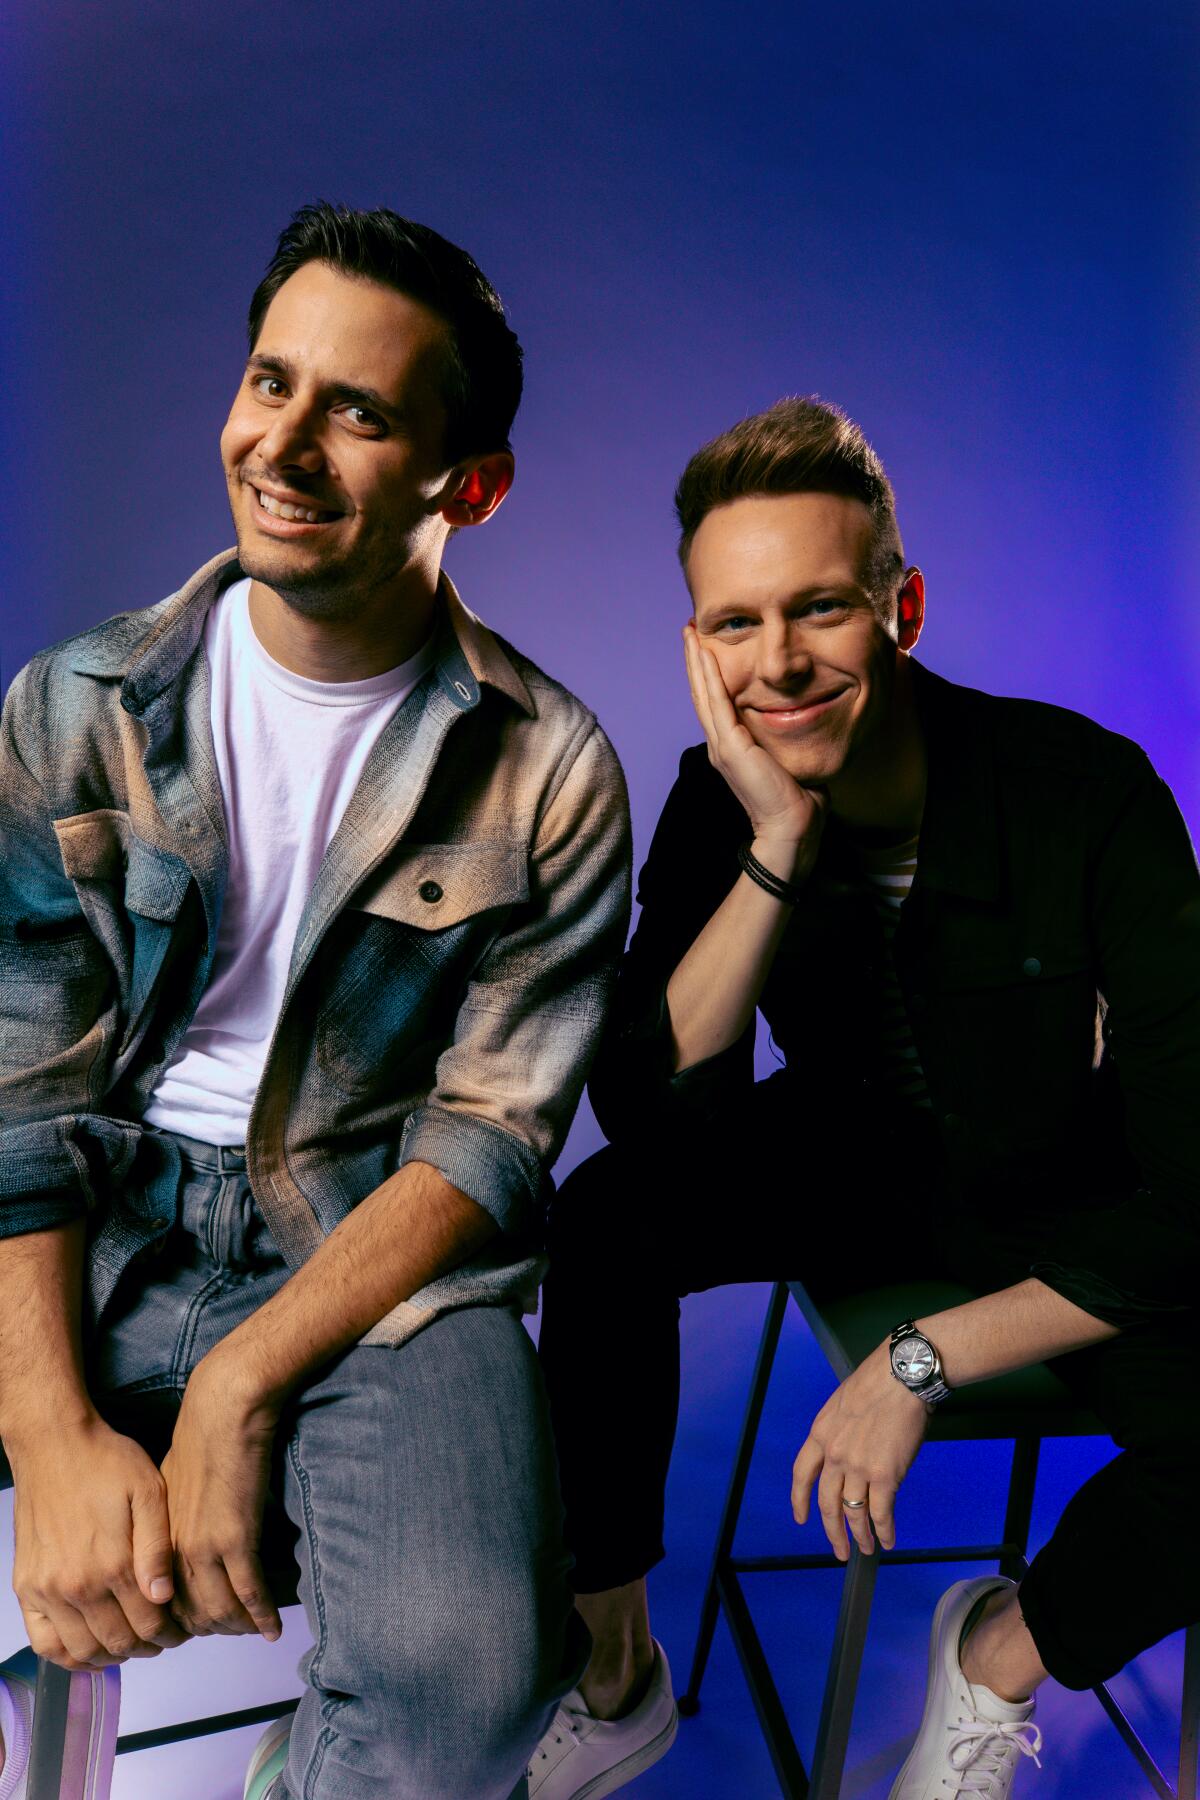 Benj Pasek and Justin Paul sit together casually for a portrait.